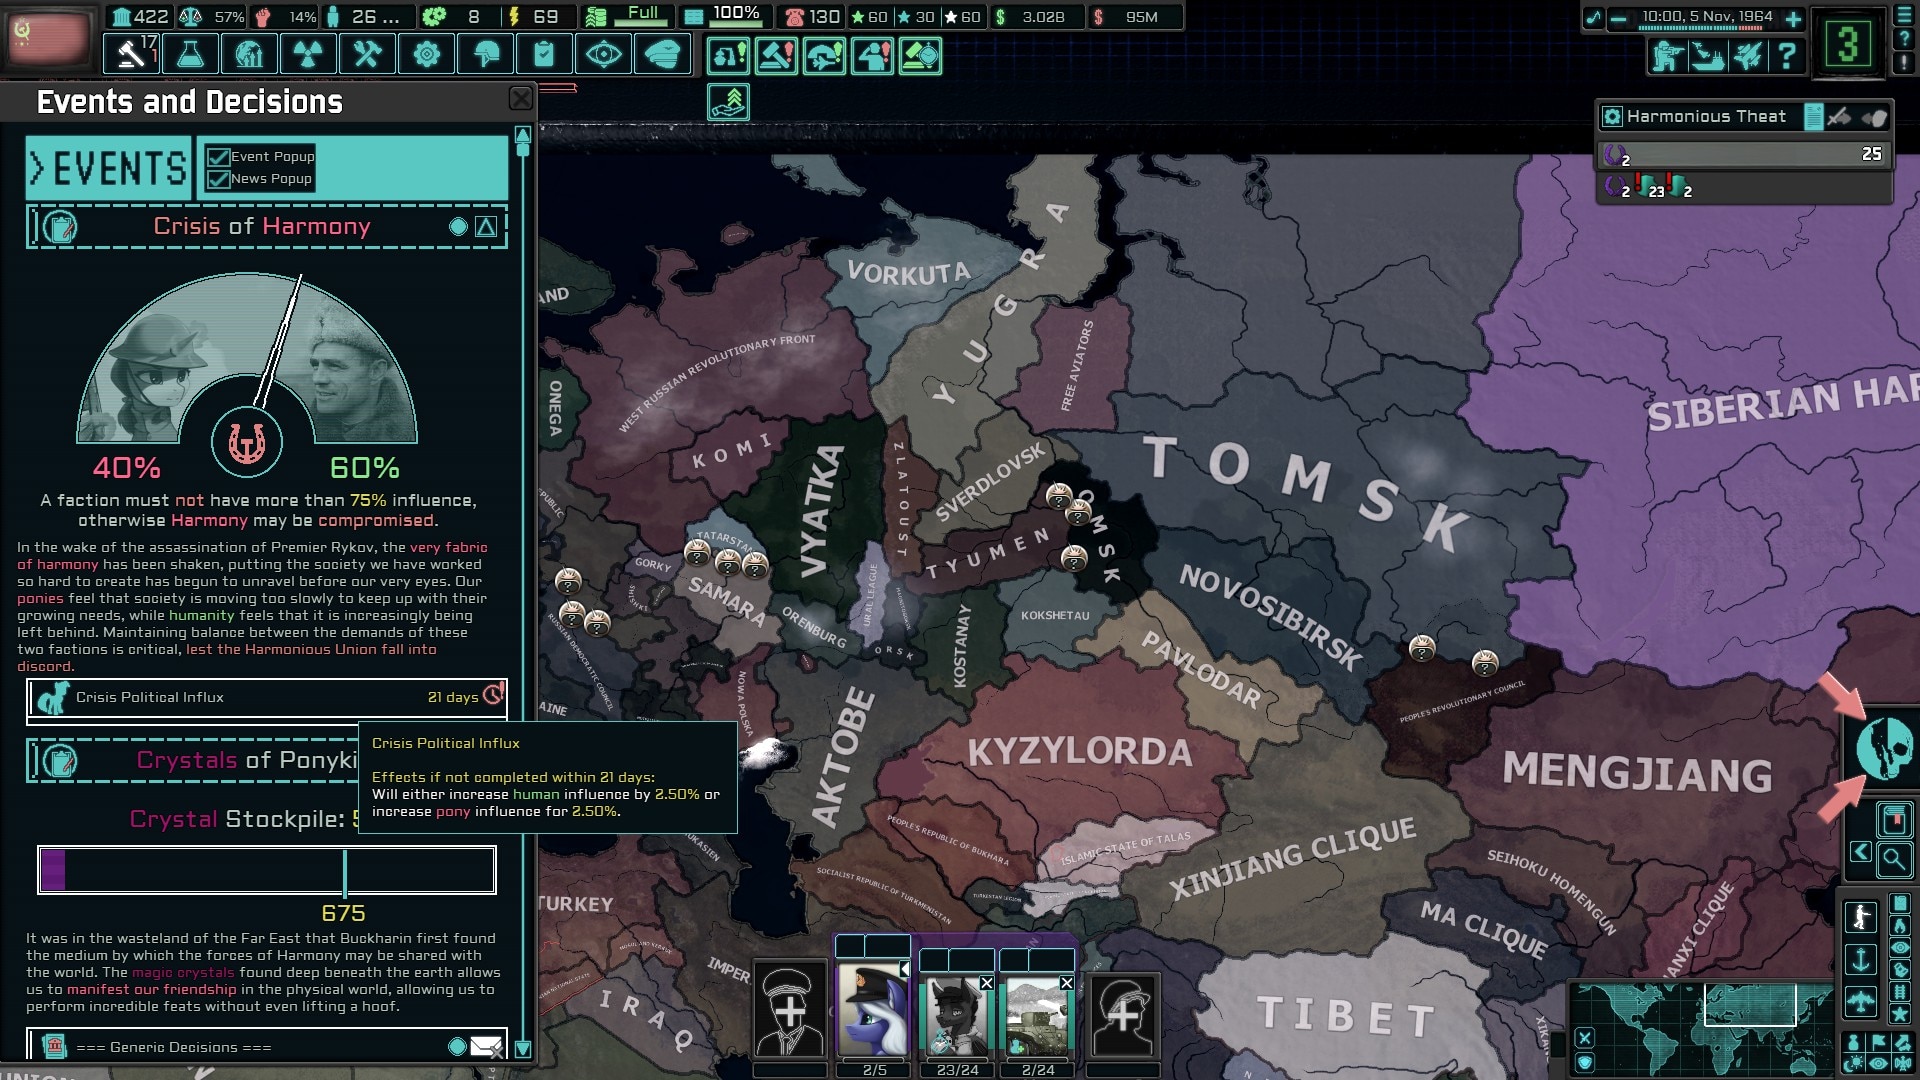 Conduct mod development for paradox hearts of iron iv by Nikitasandstrom